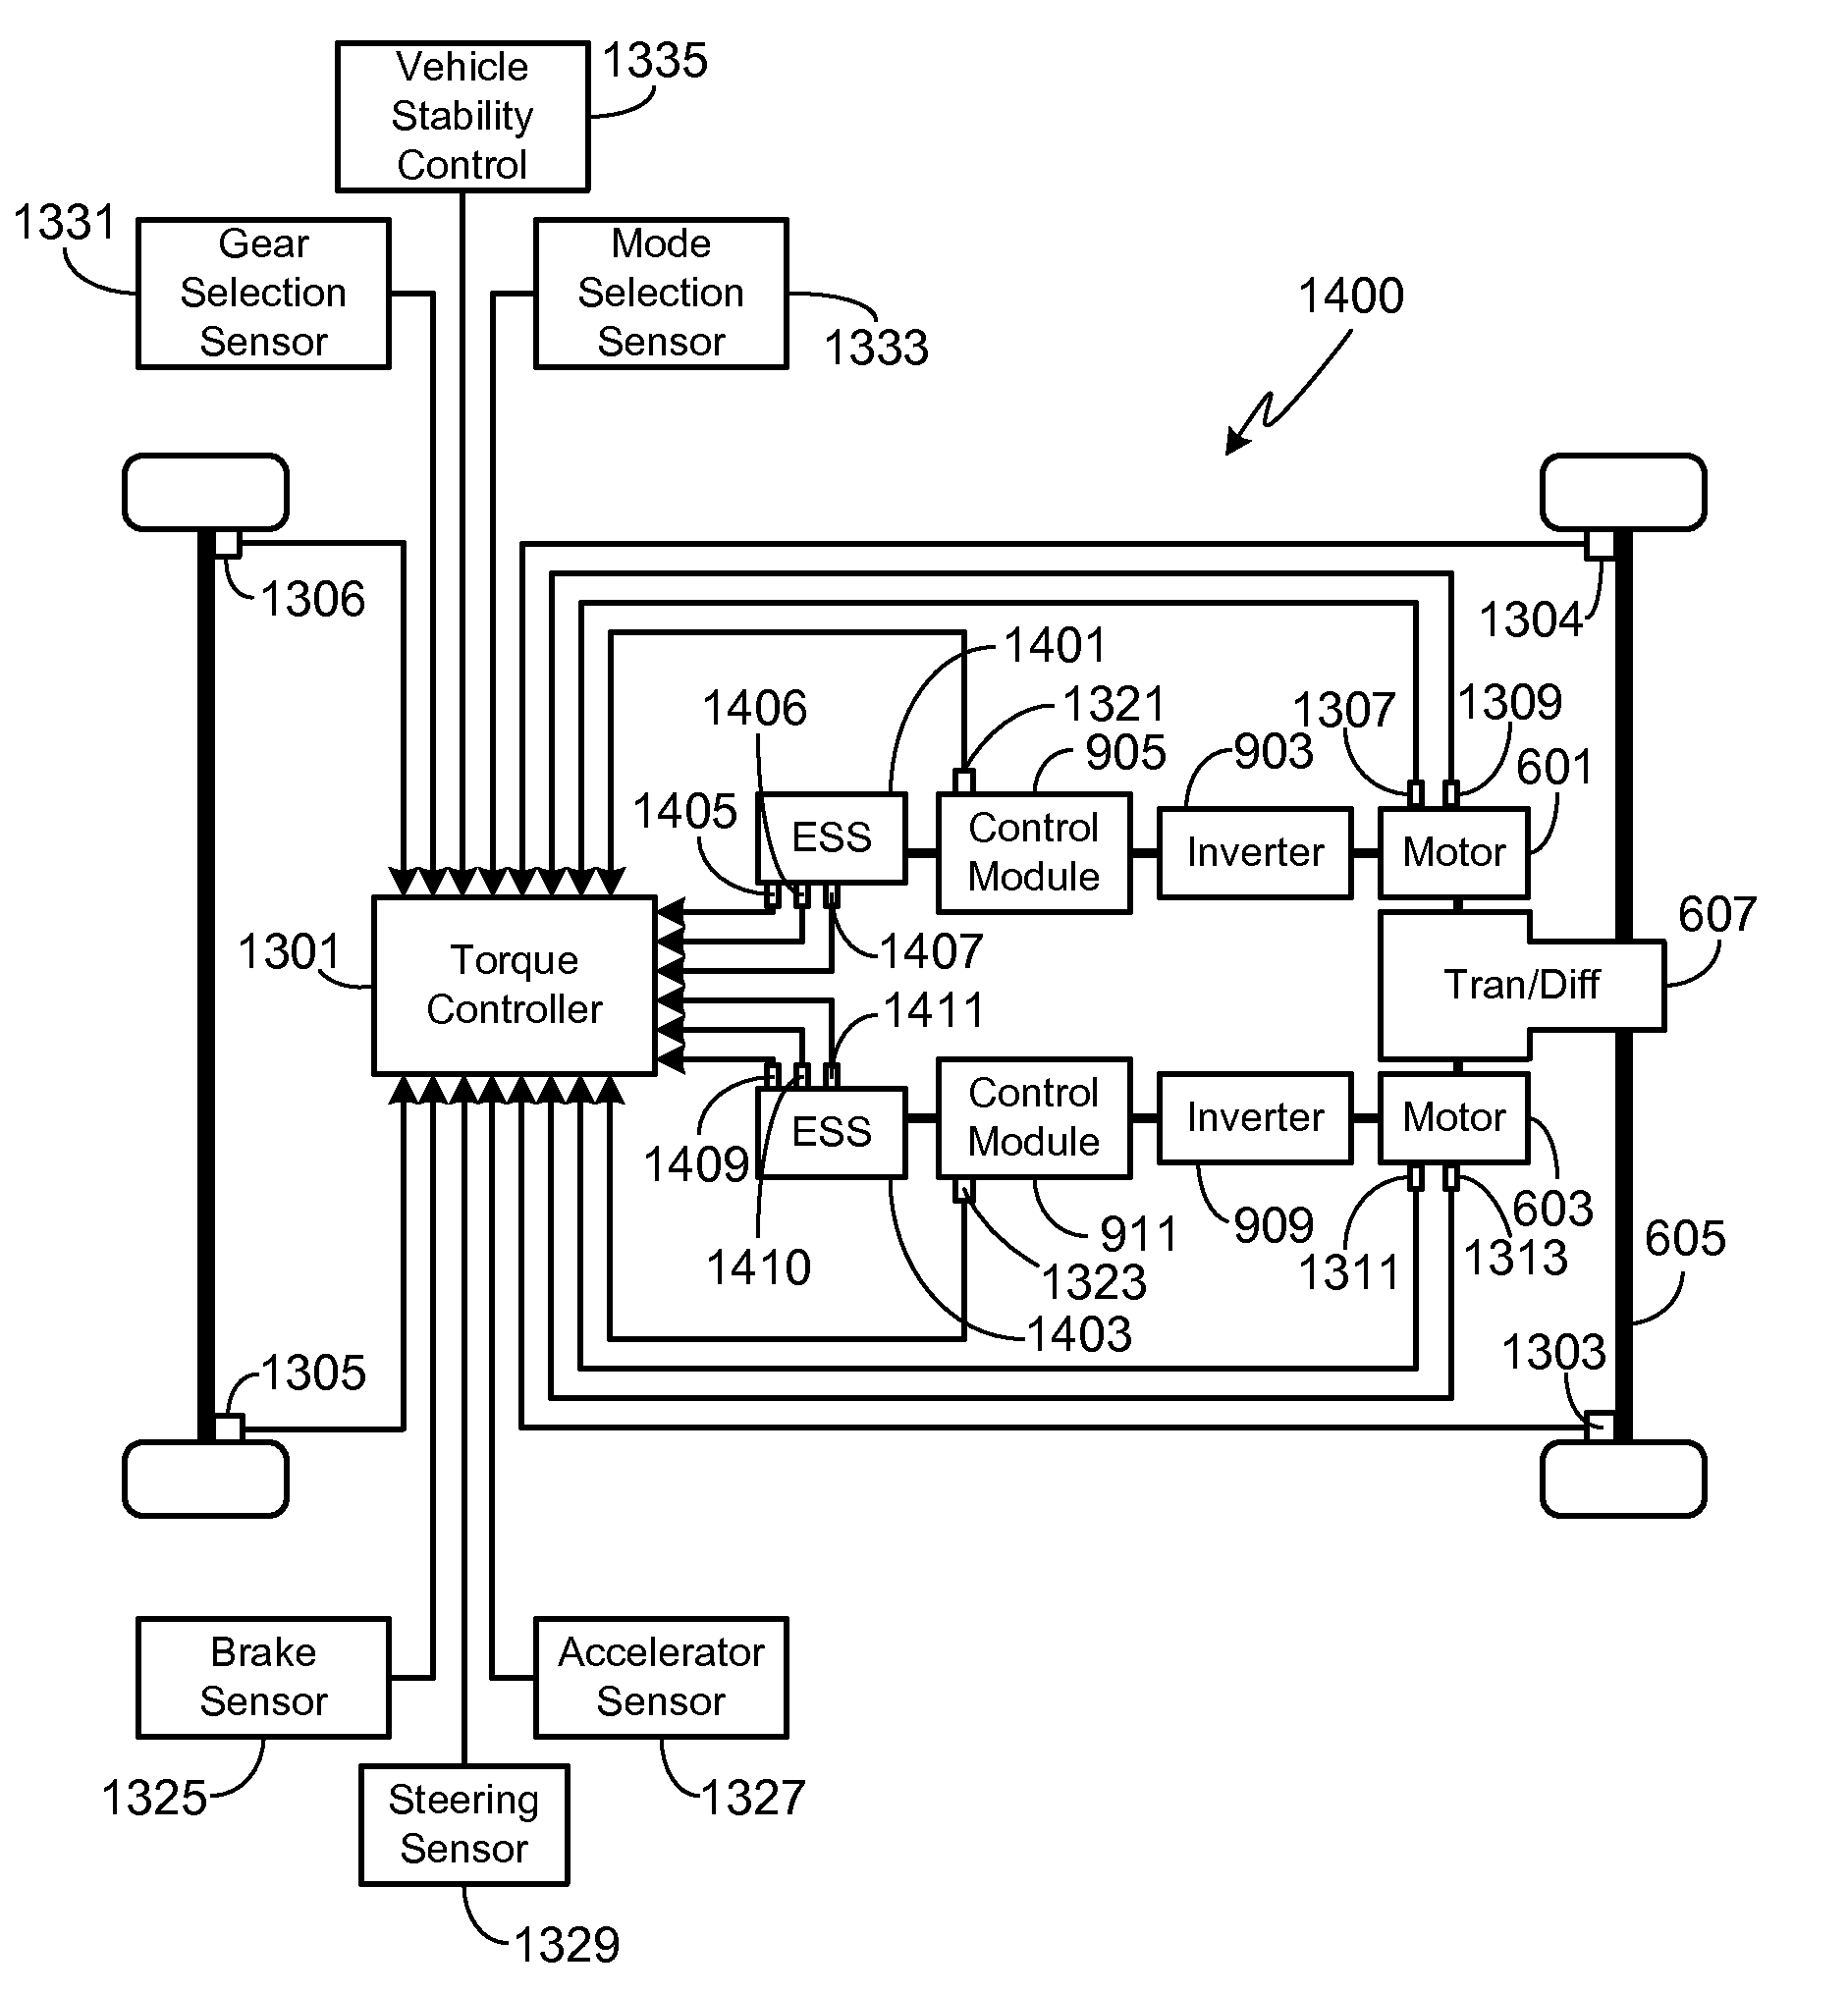 Dual Motor Drive and Control System for an Electric Vehicle